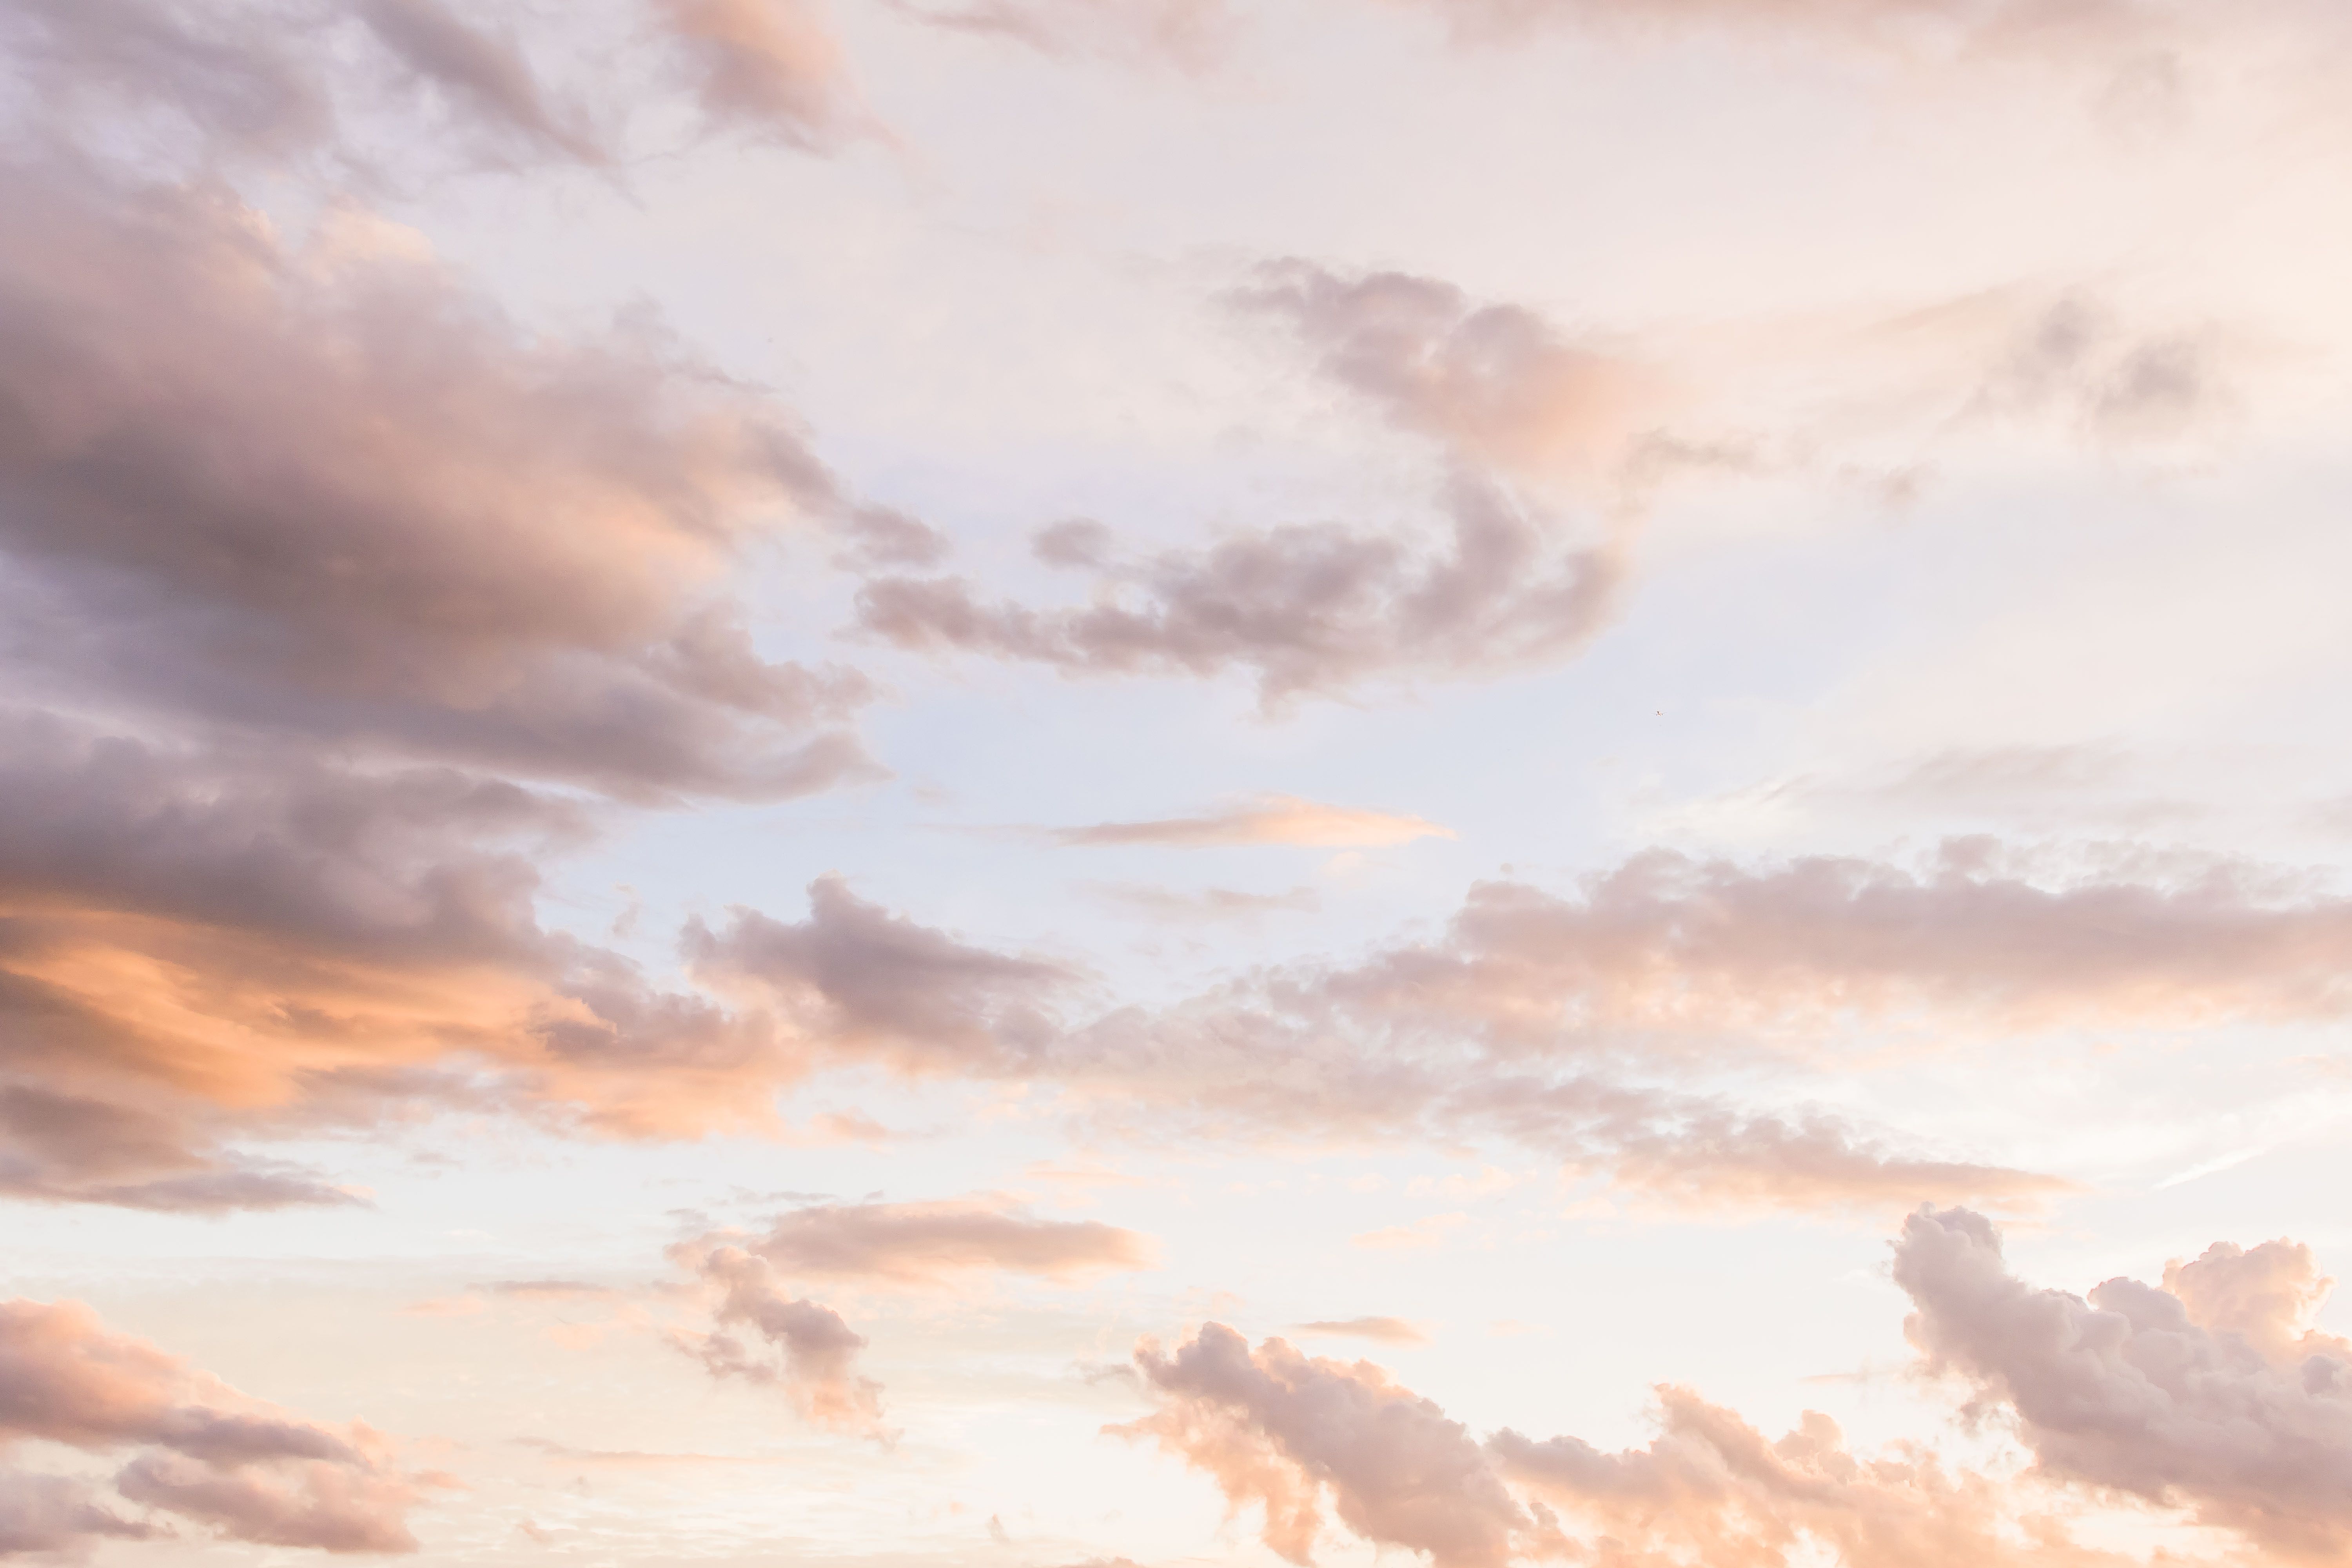 Pastel Aesthetic Clouds Wallpaper Free Pastel Aesthetic Clouds Background